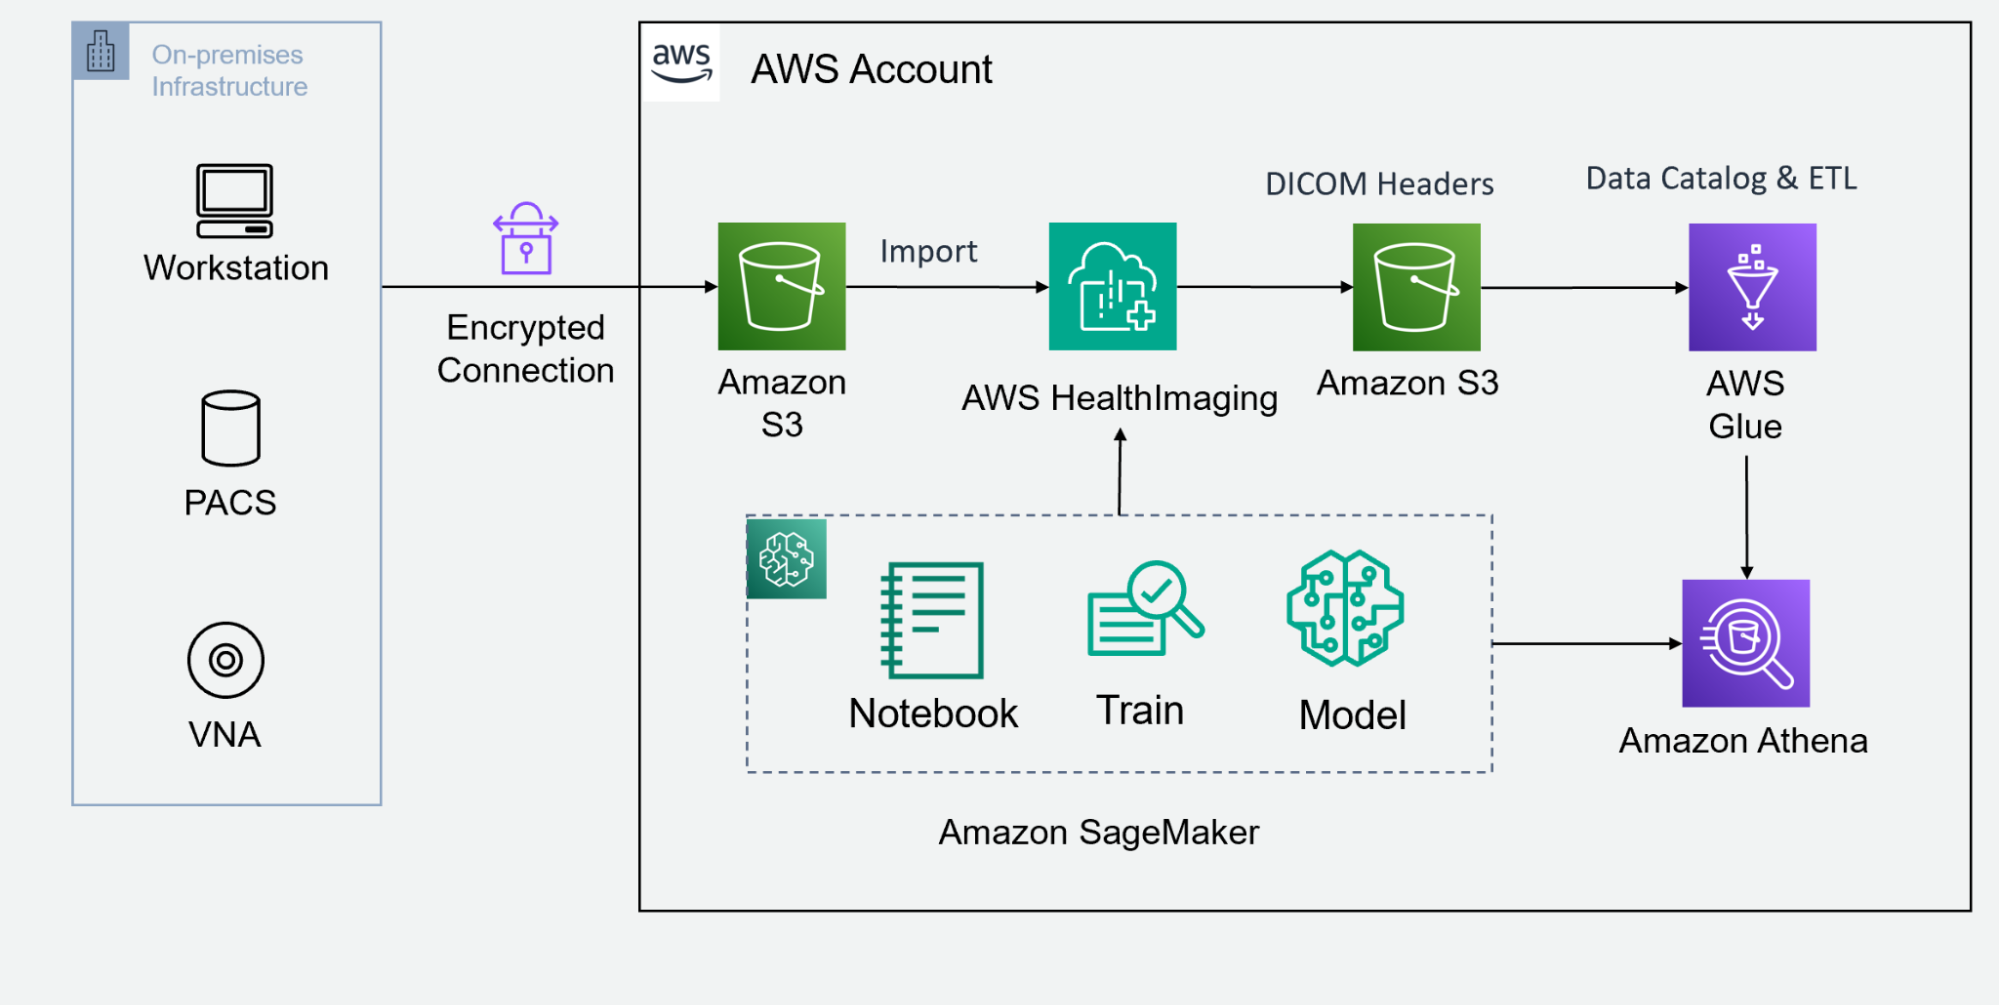 A diagram of the AWS Network backbone interface, from on-premises infrastructure to an AWS Account using Amazon Sagemaker.
